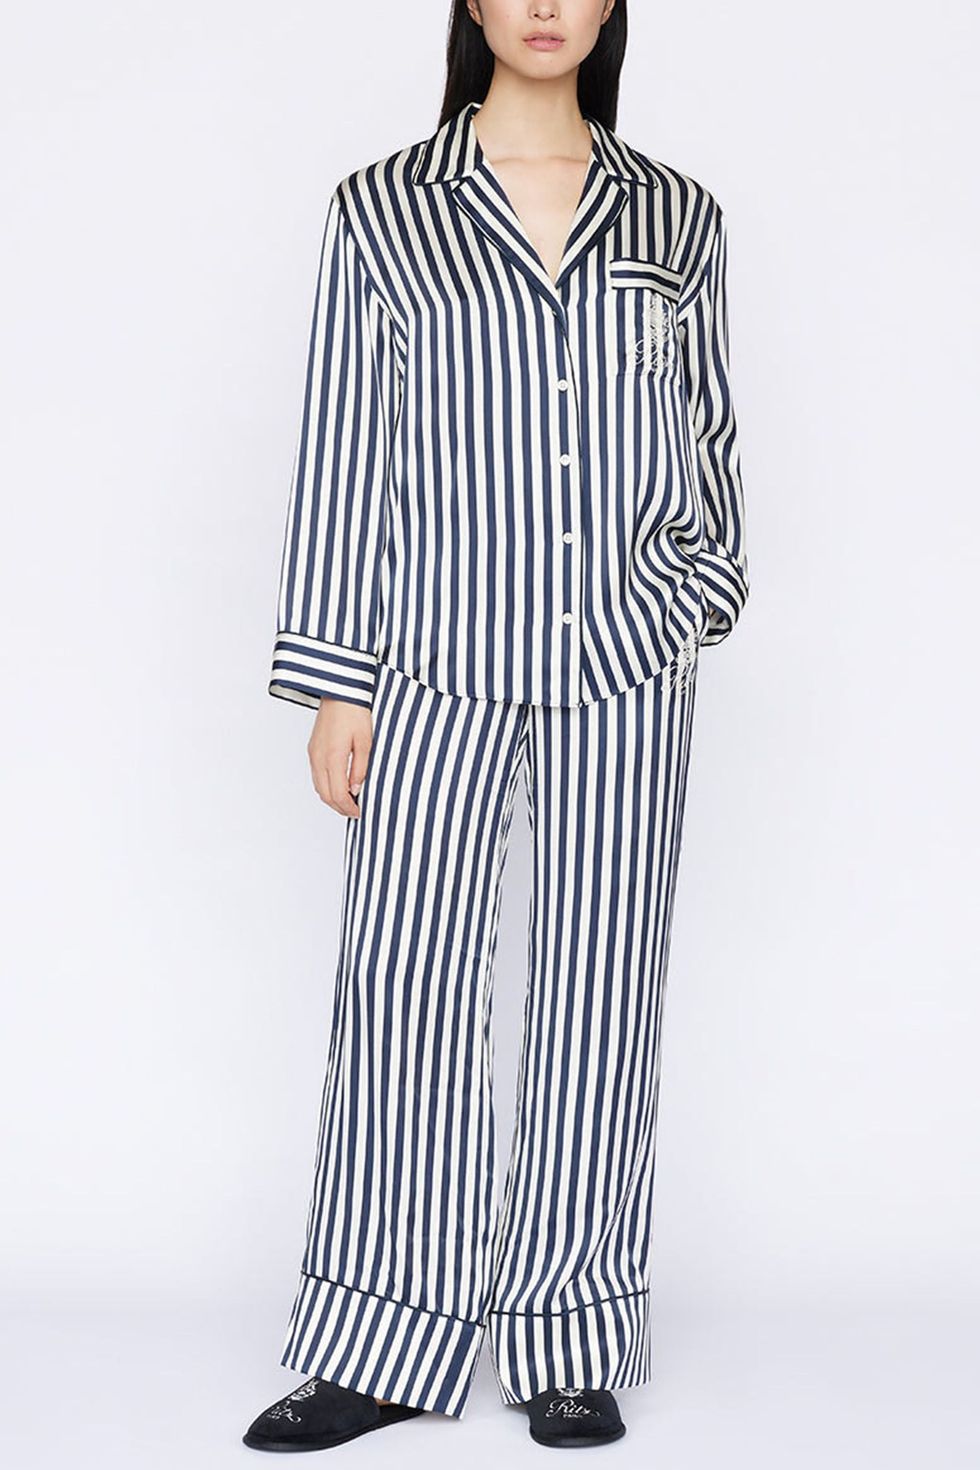 Eberjey Just Launched Washable Silk PJs to Make Your Lounging More